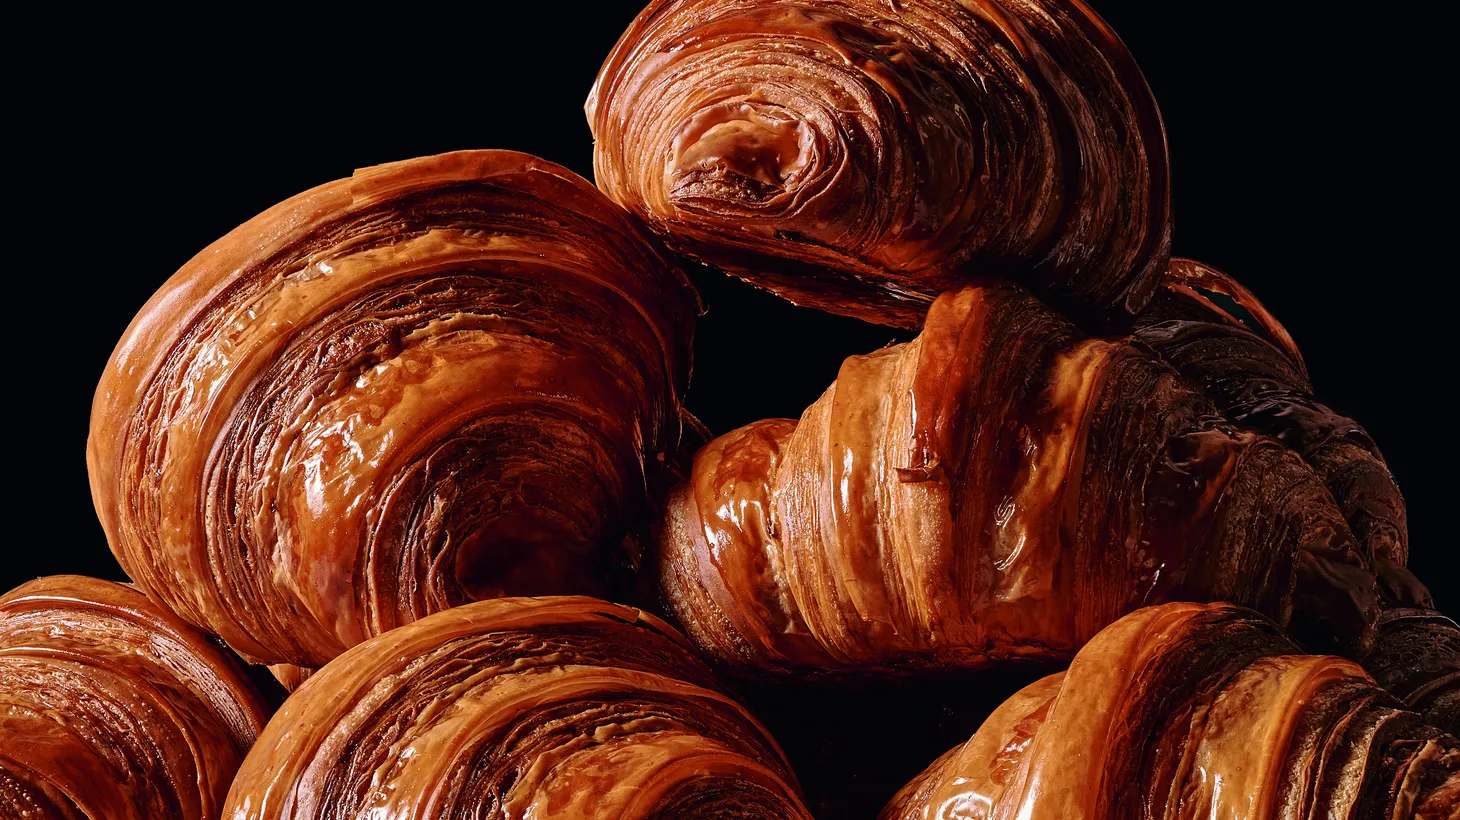 "A croissant is truly a celebration of the butter that it's made with," says Kate Reid of Lune Croissanterie. "If you can't truly taste the butter, then you haven't put enough in it and you haven't made it the proper way."